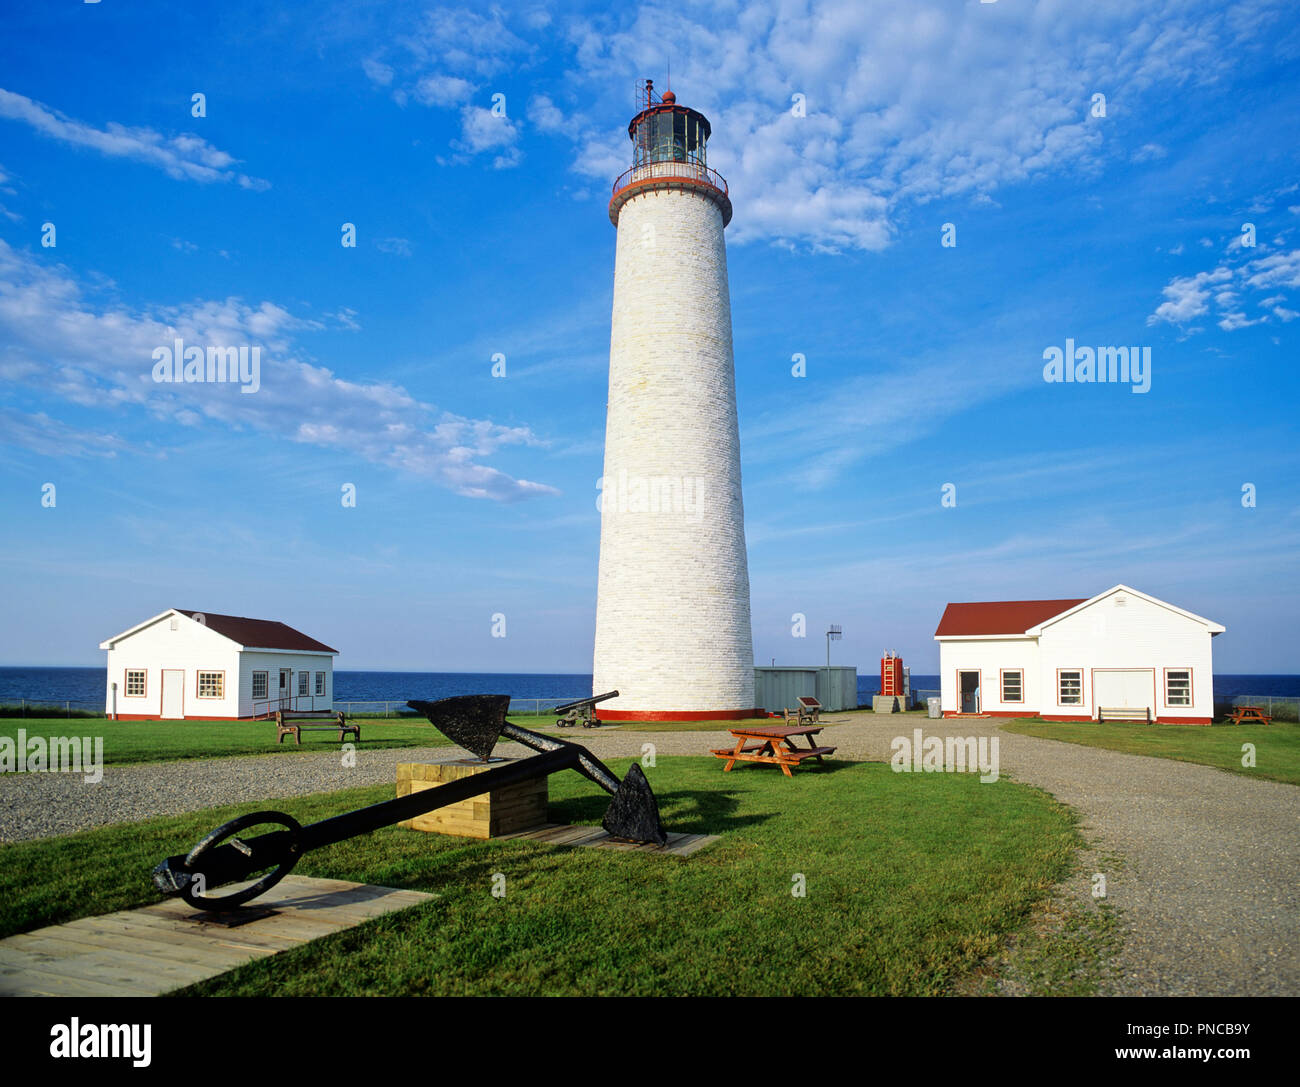 North America, Canada, Quebec, Gaspe Peninsula, Cap-des-Rosiers Lighthouse, National Historic Site, highest in Canada, built 1858, 34.1 m, 112 feet ta Stock Photo